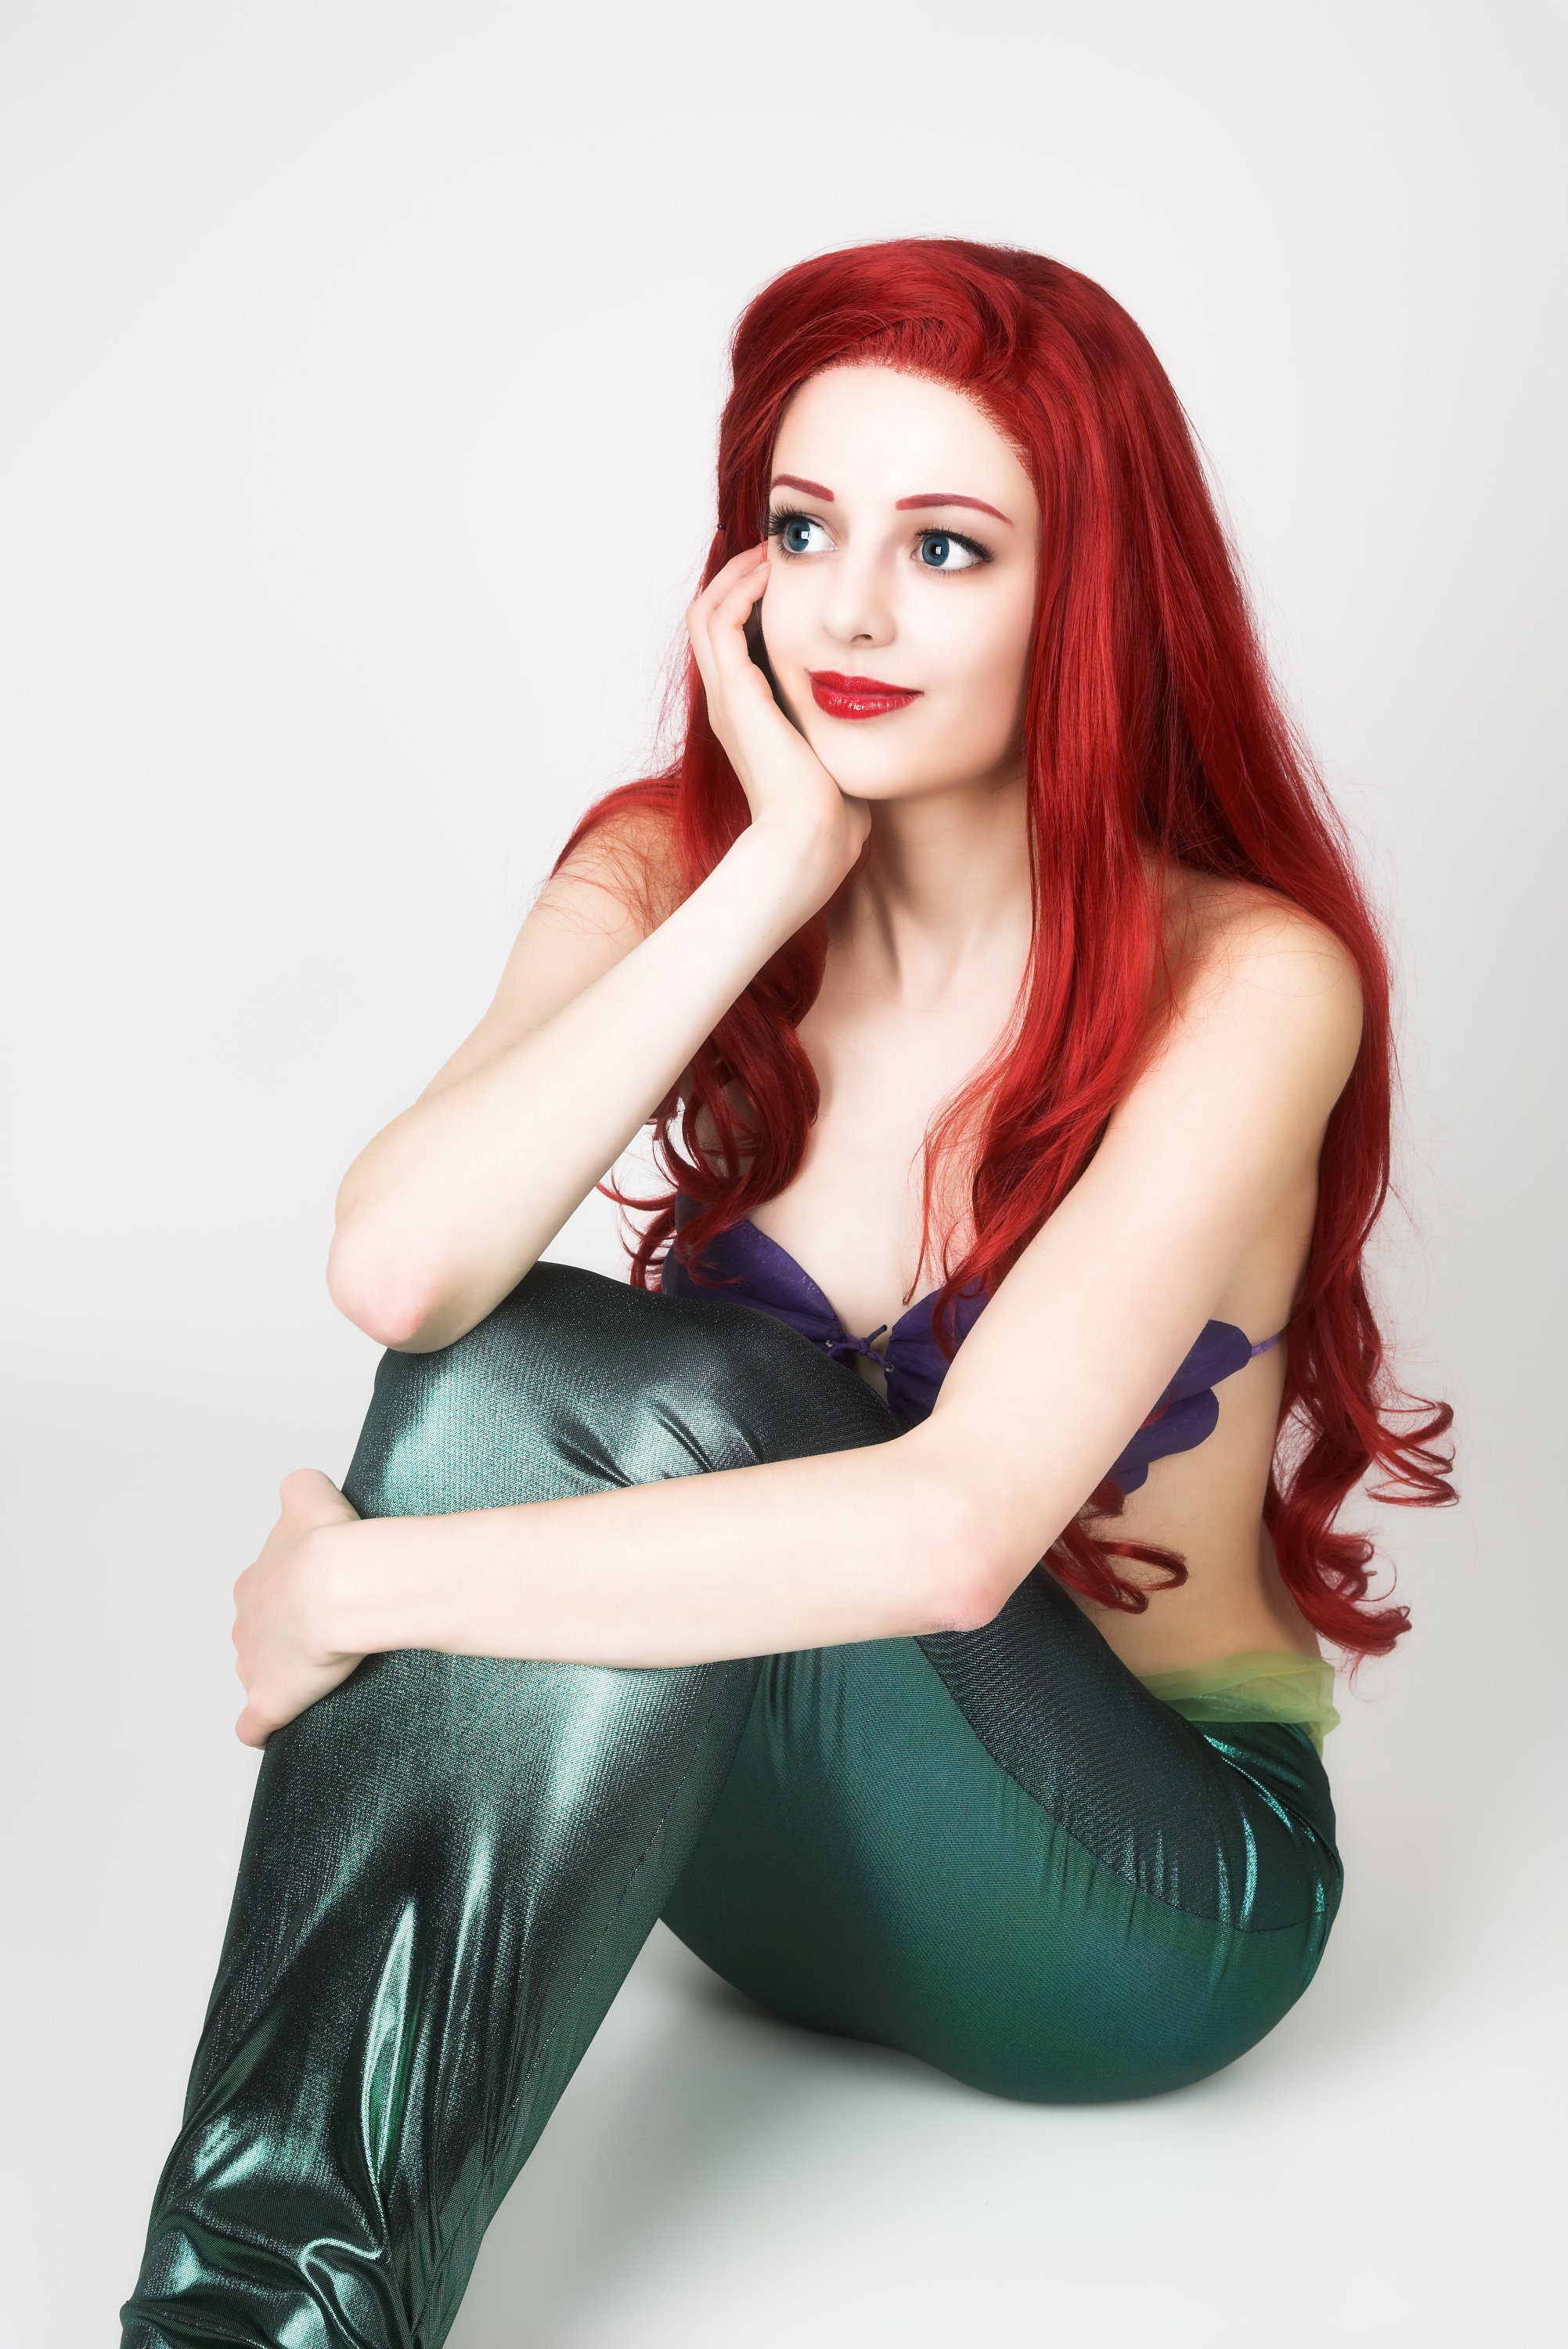 Ariel Green Mermaid Costume Tights for Women, Ariel Cosplay Tights,  Semi-opaque Green Tights for Mermaid Outfit Halloween 